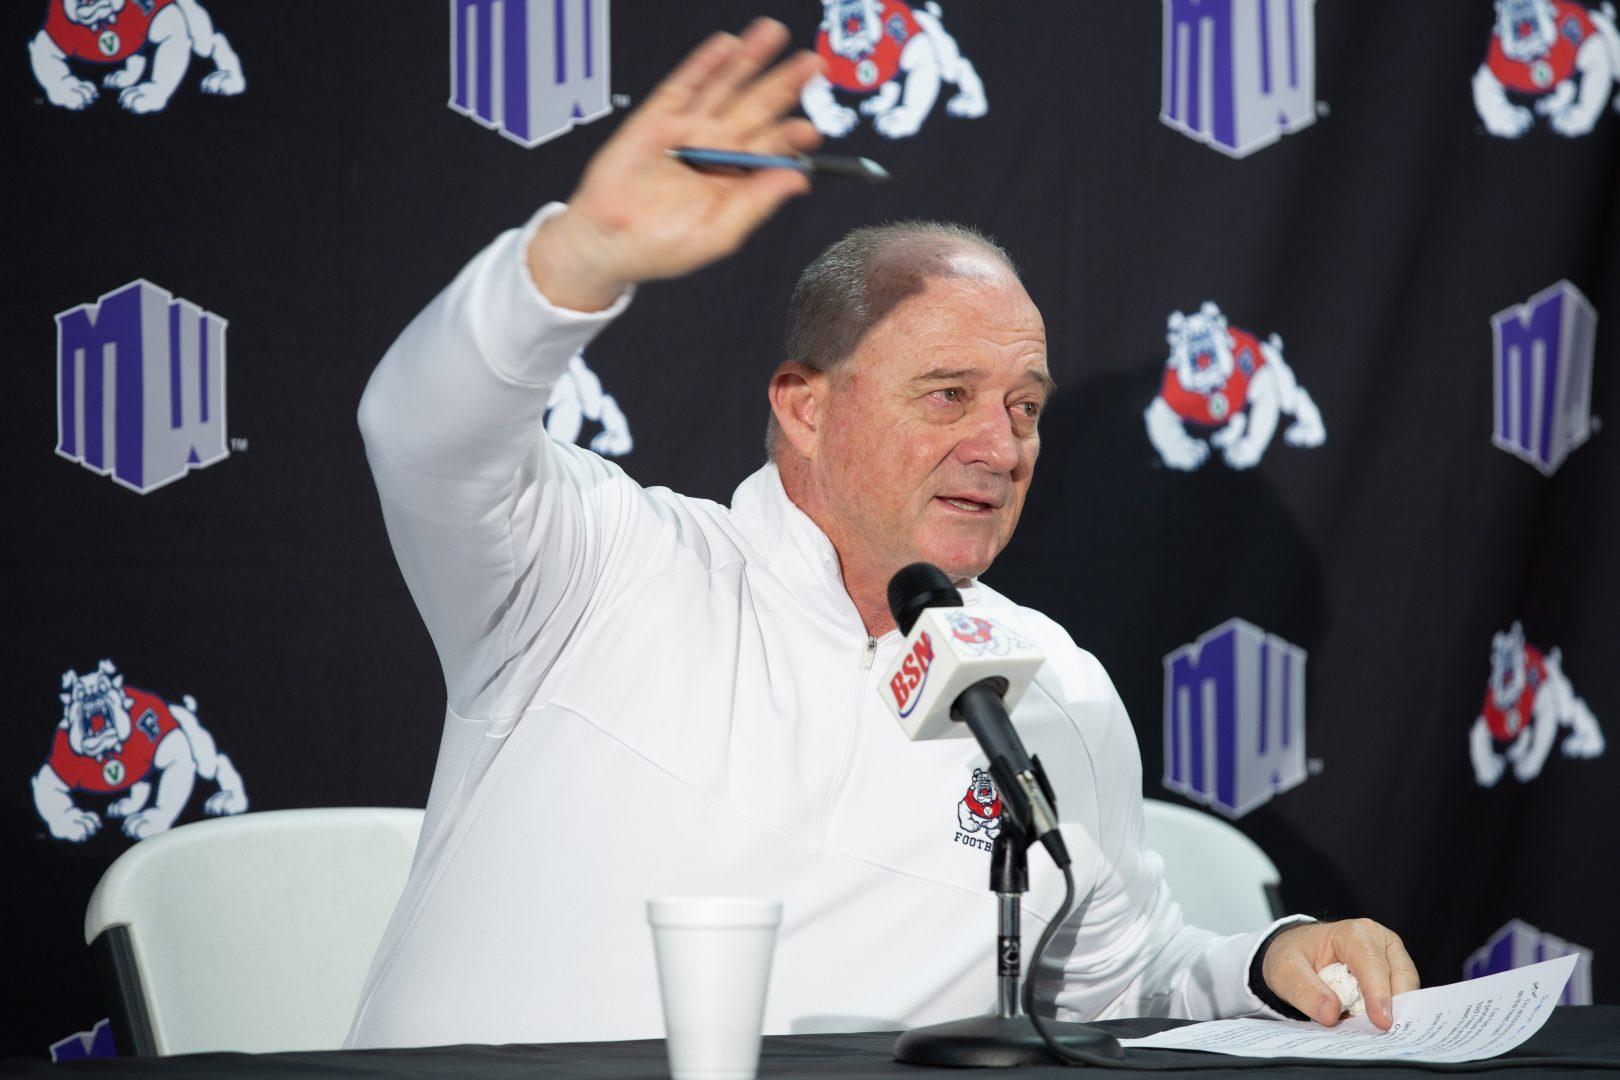 Jeff Tedford former Fresno State football head coach waves goodbye to those in attendance at his resignation press conference on Friday, Dec. 6, 2019. (Armando Carreno/The Collegian)